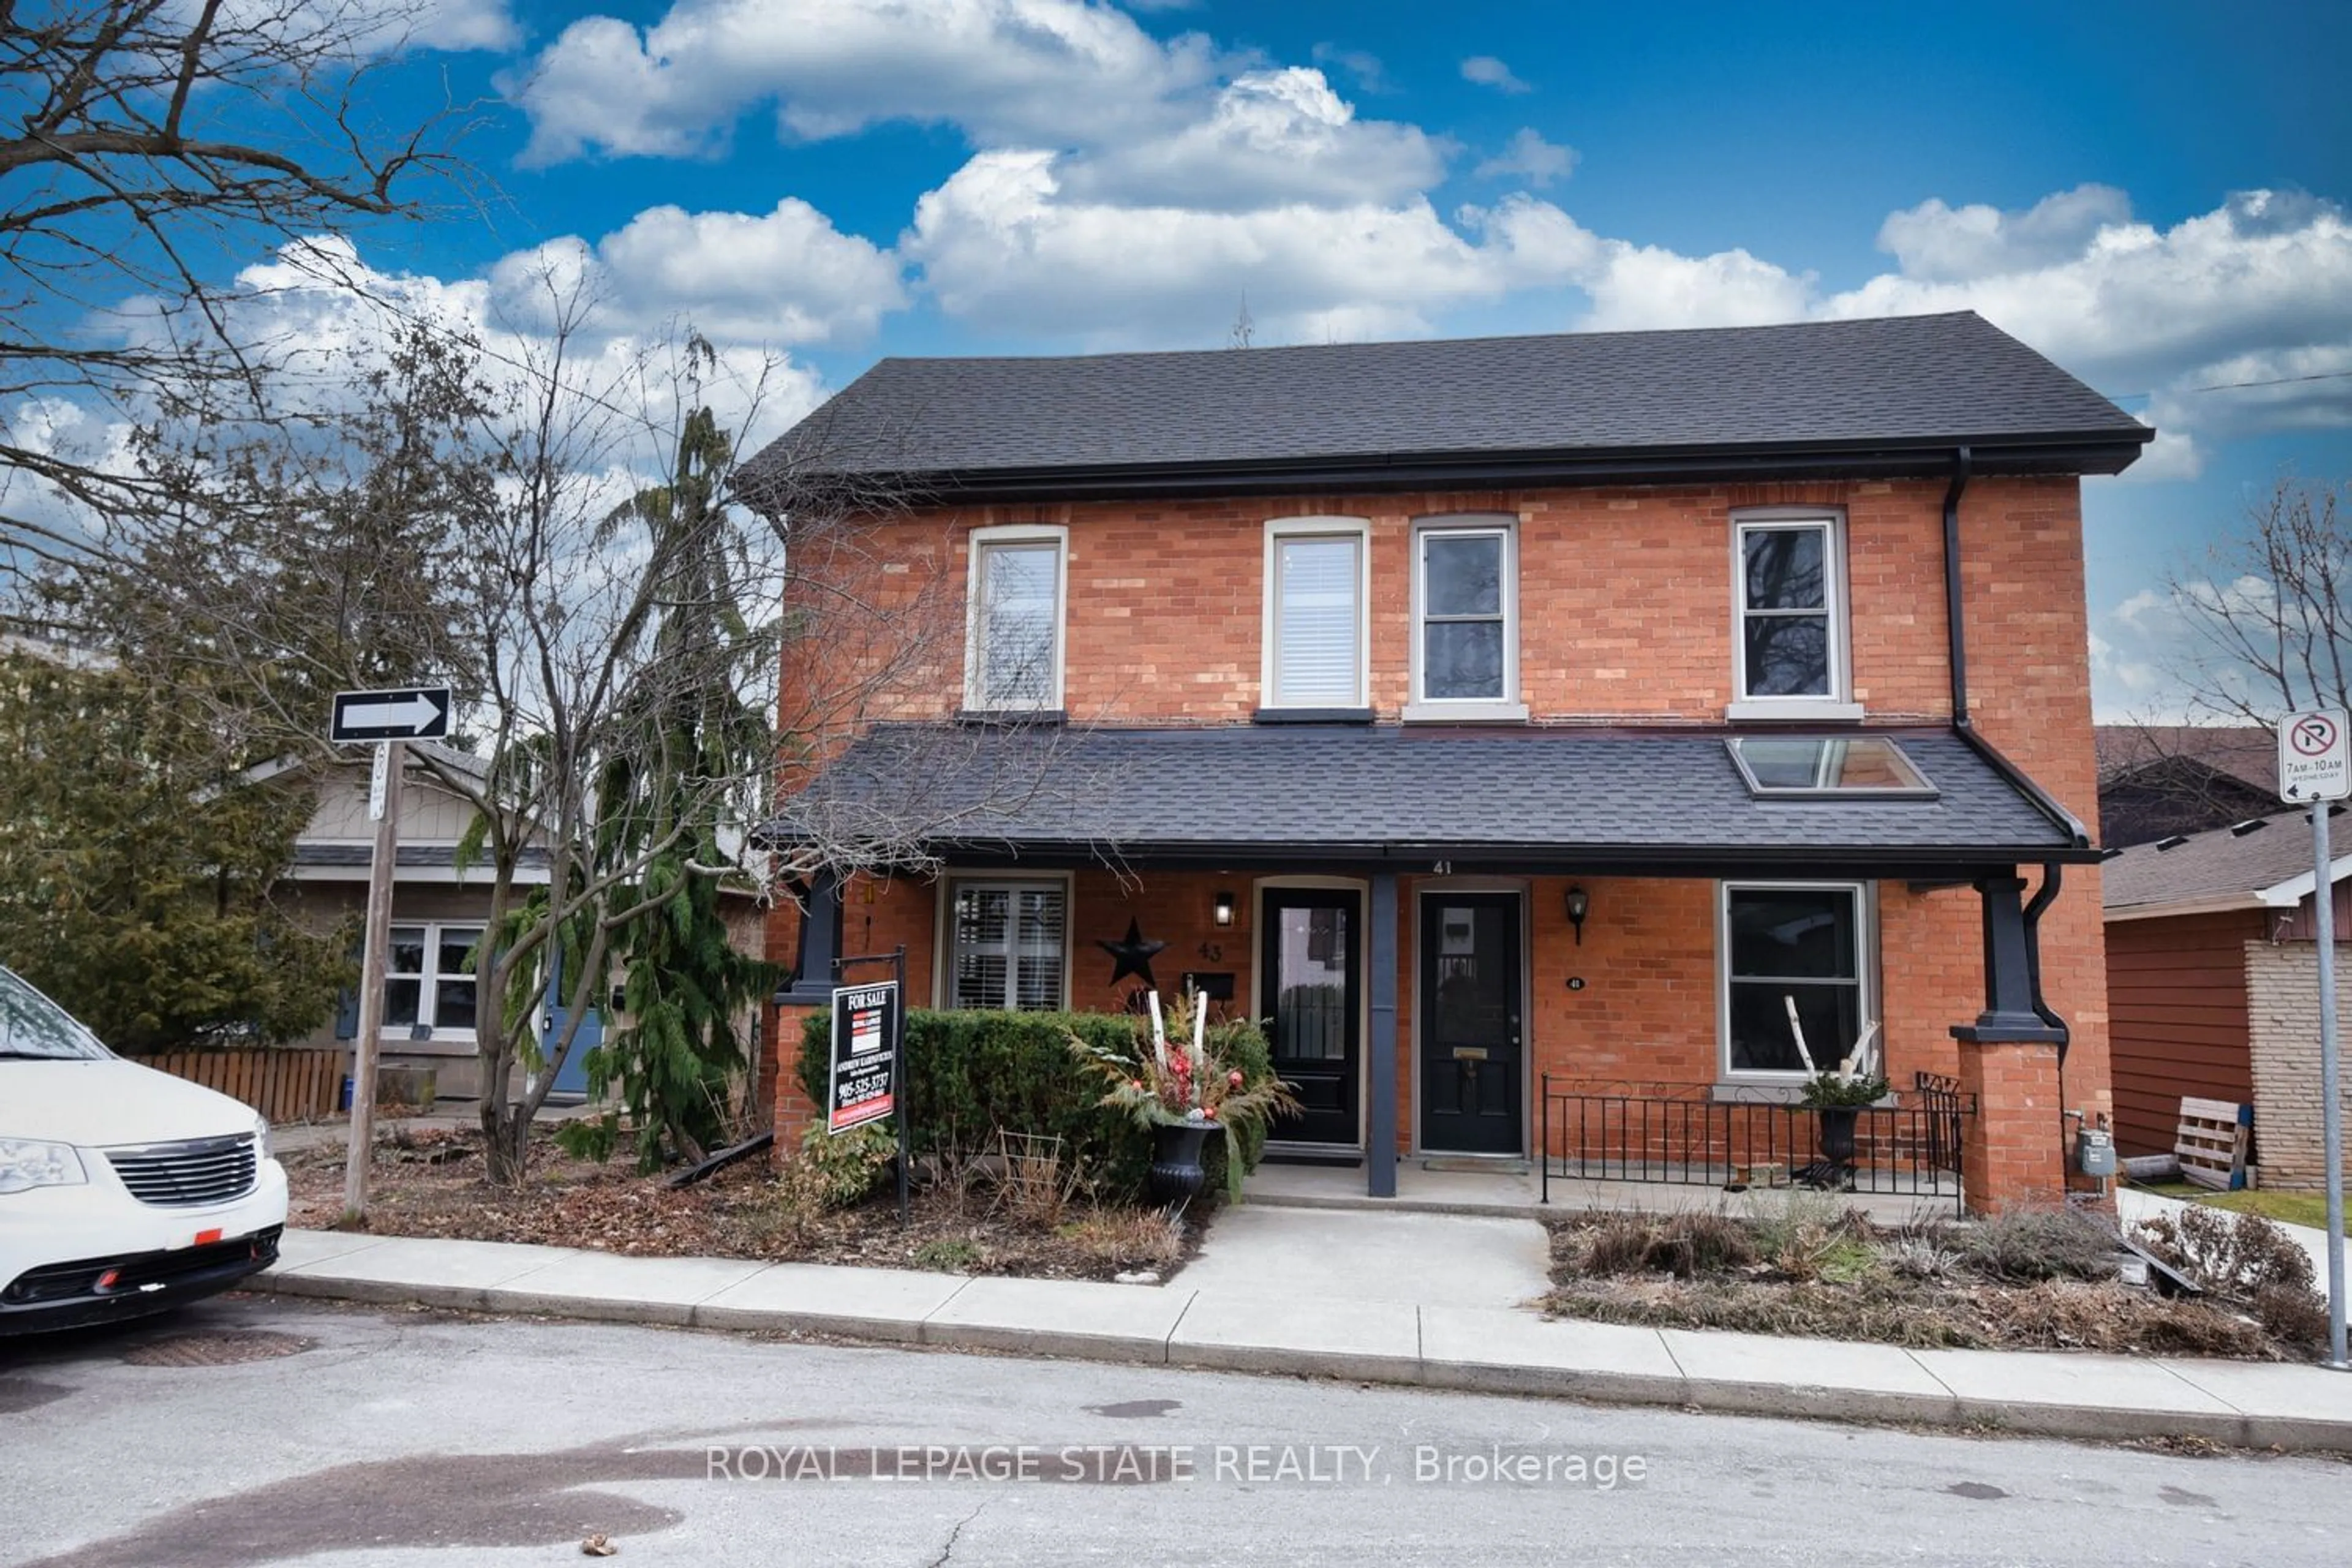 Home with brick exterior material for 43 Market St, Hamilton Ontario L9H 2Y6